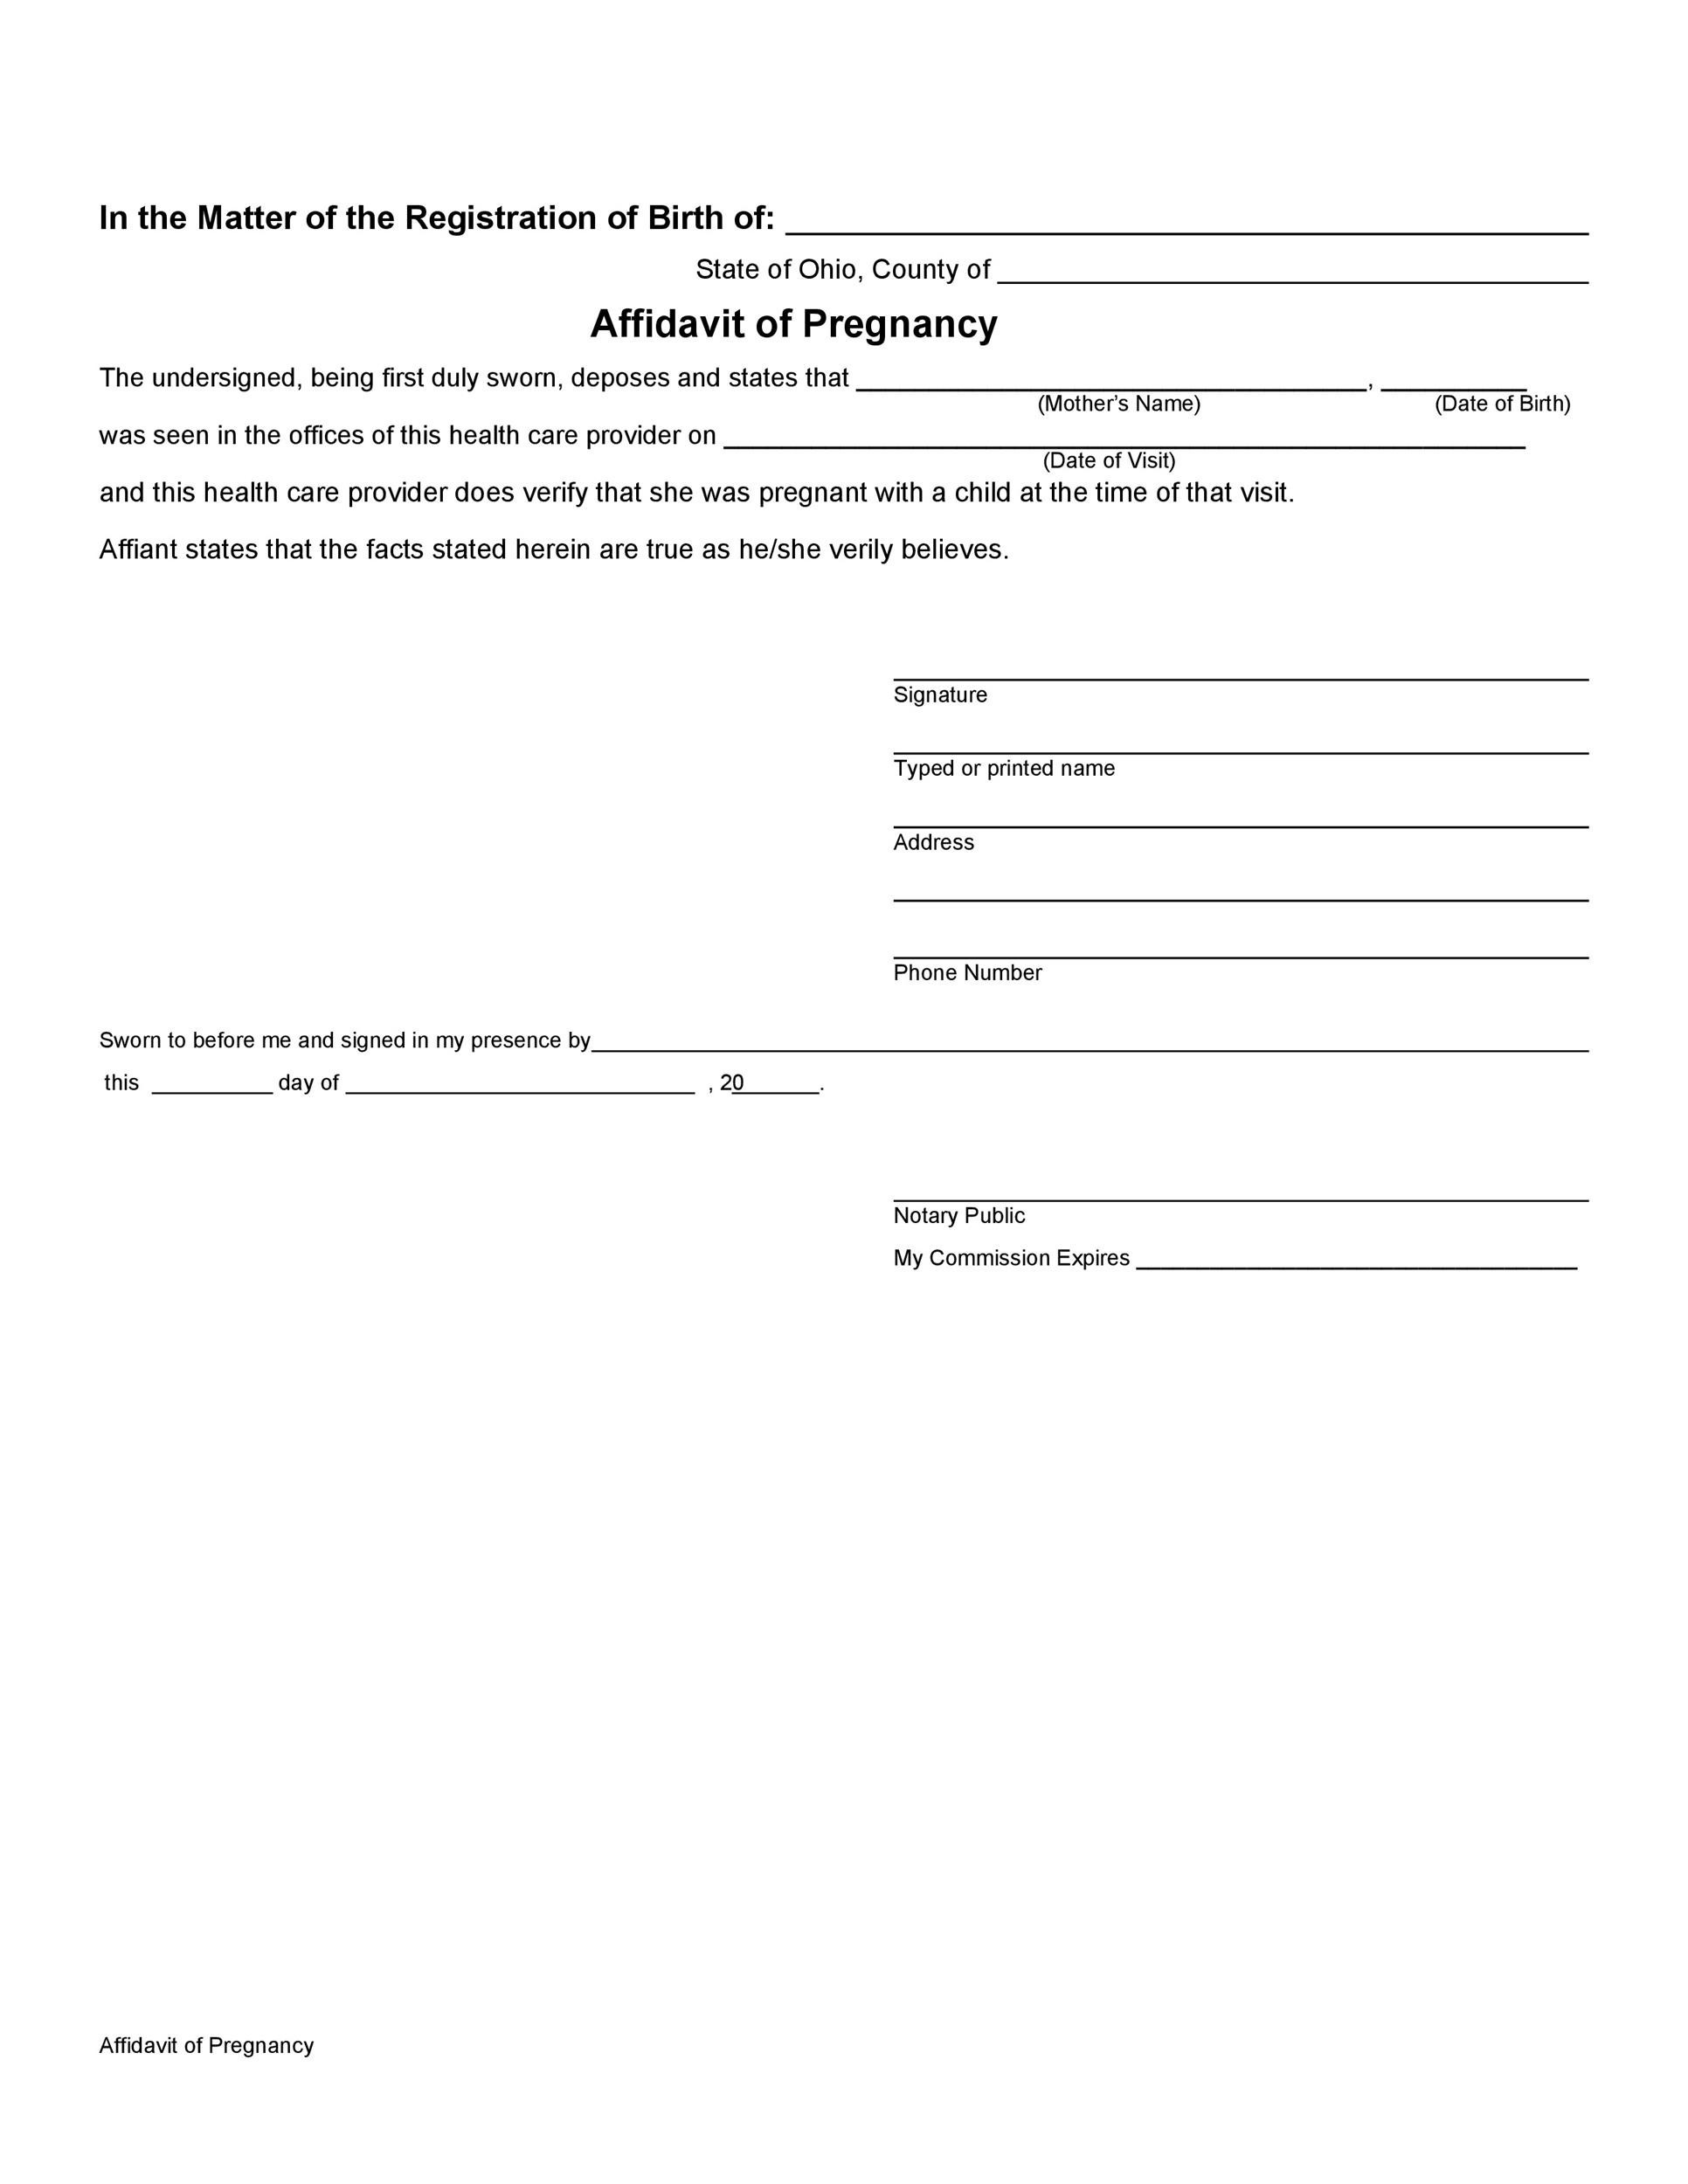 23-real-fake-pregnant-papers-pregnancy-verification-templatelab